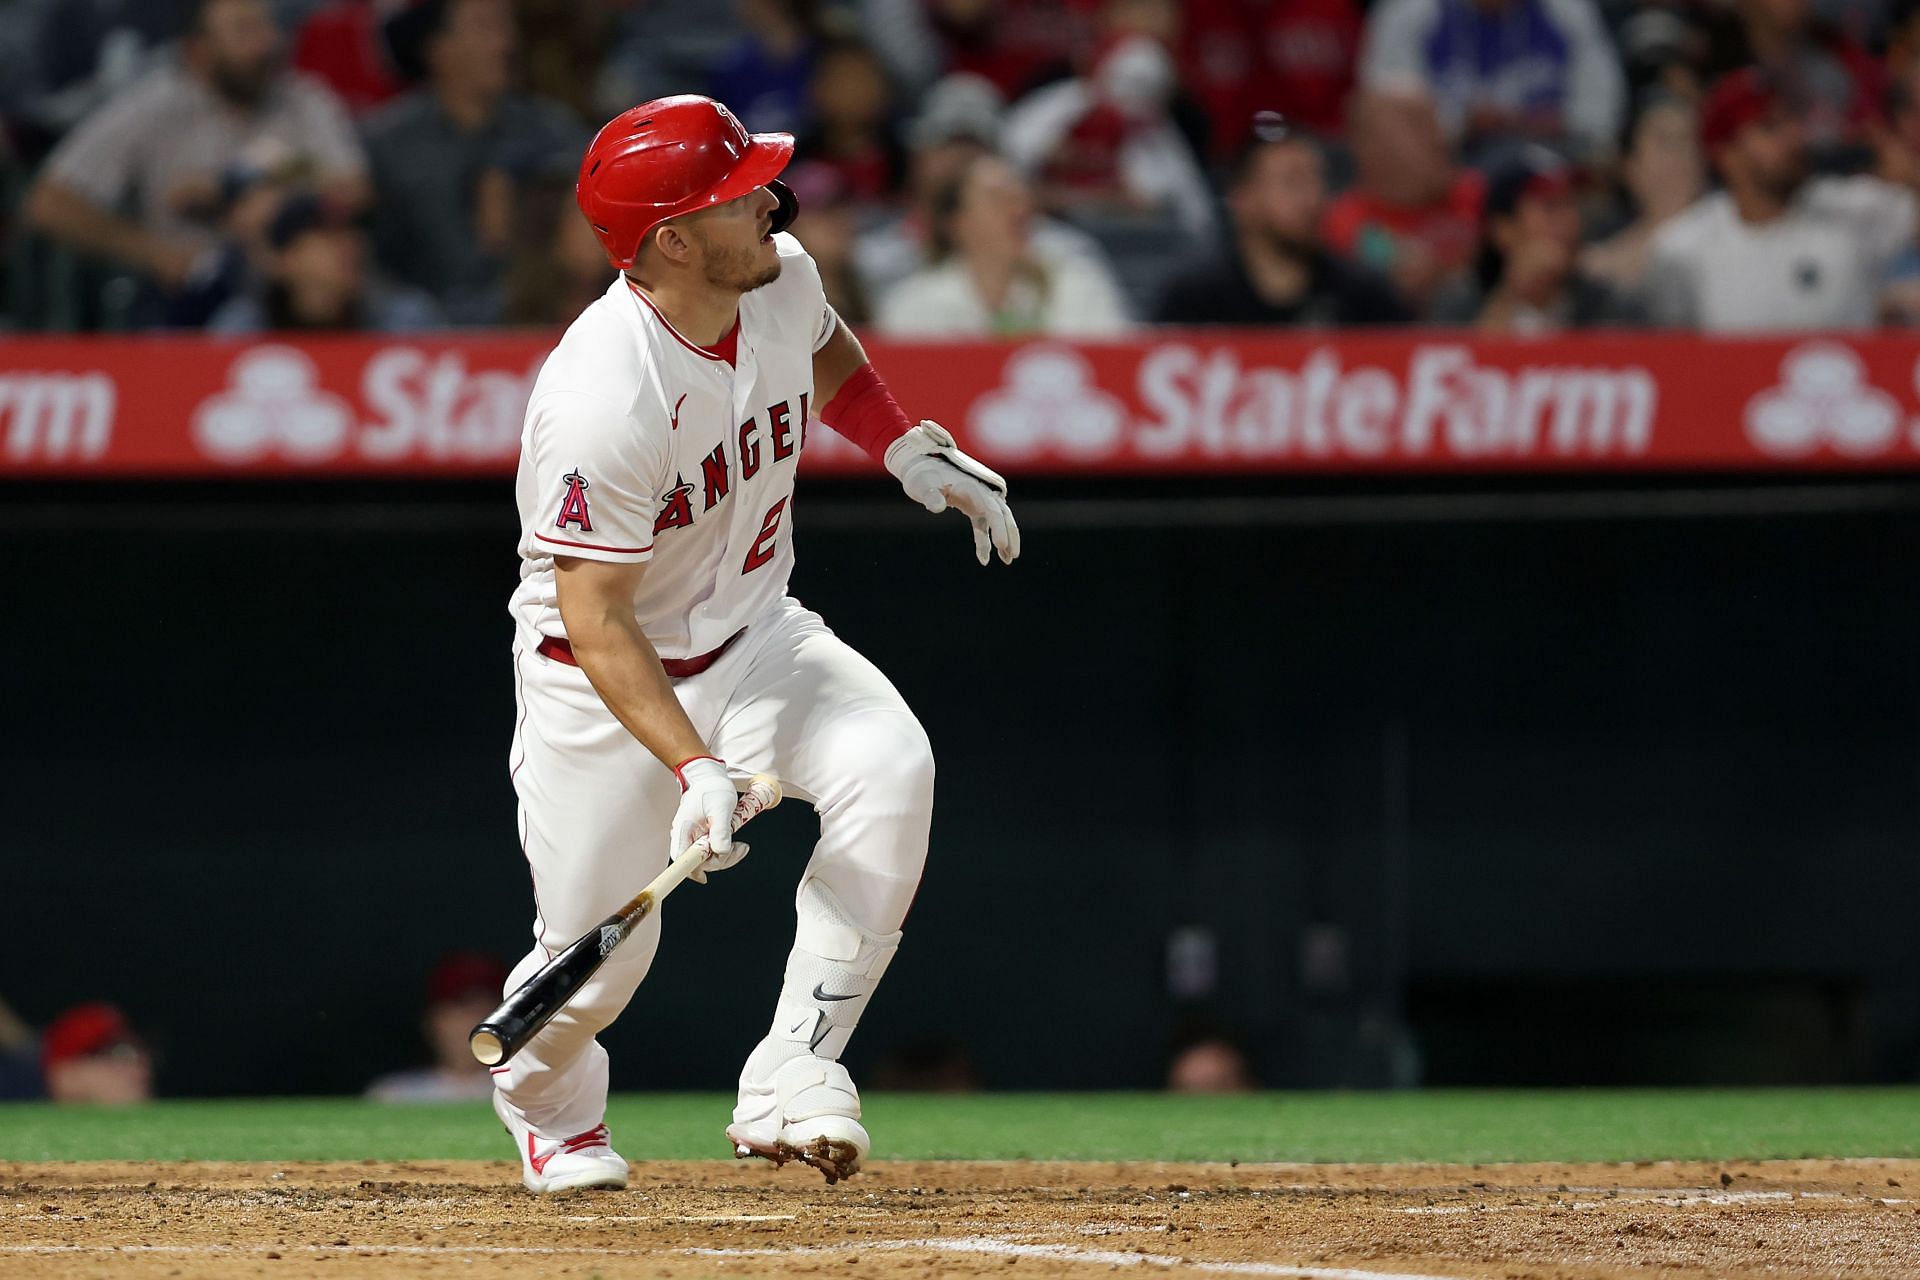 Mike Trout connects for an RBI double.